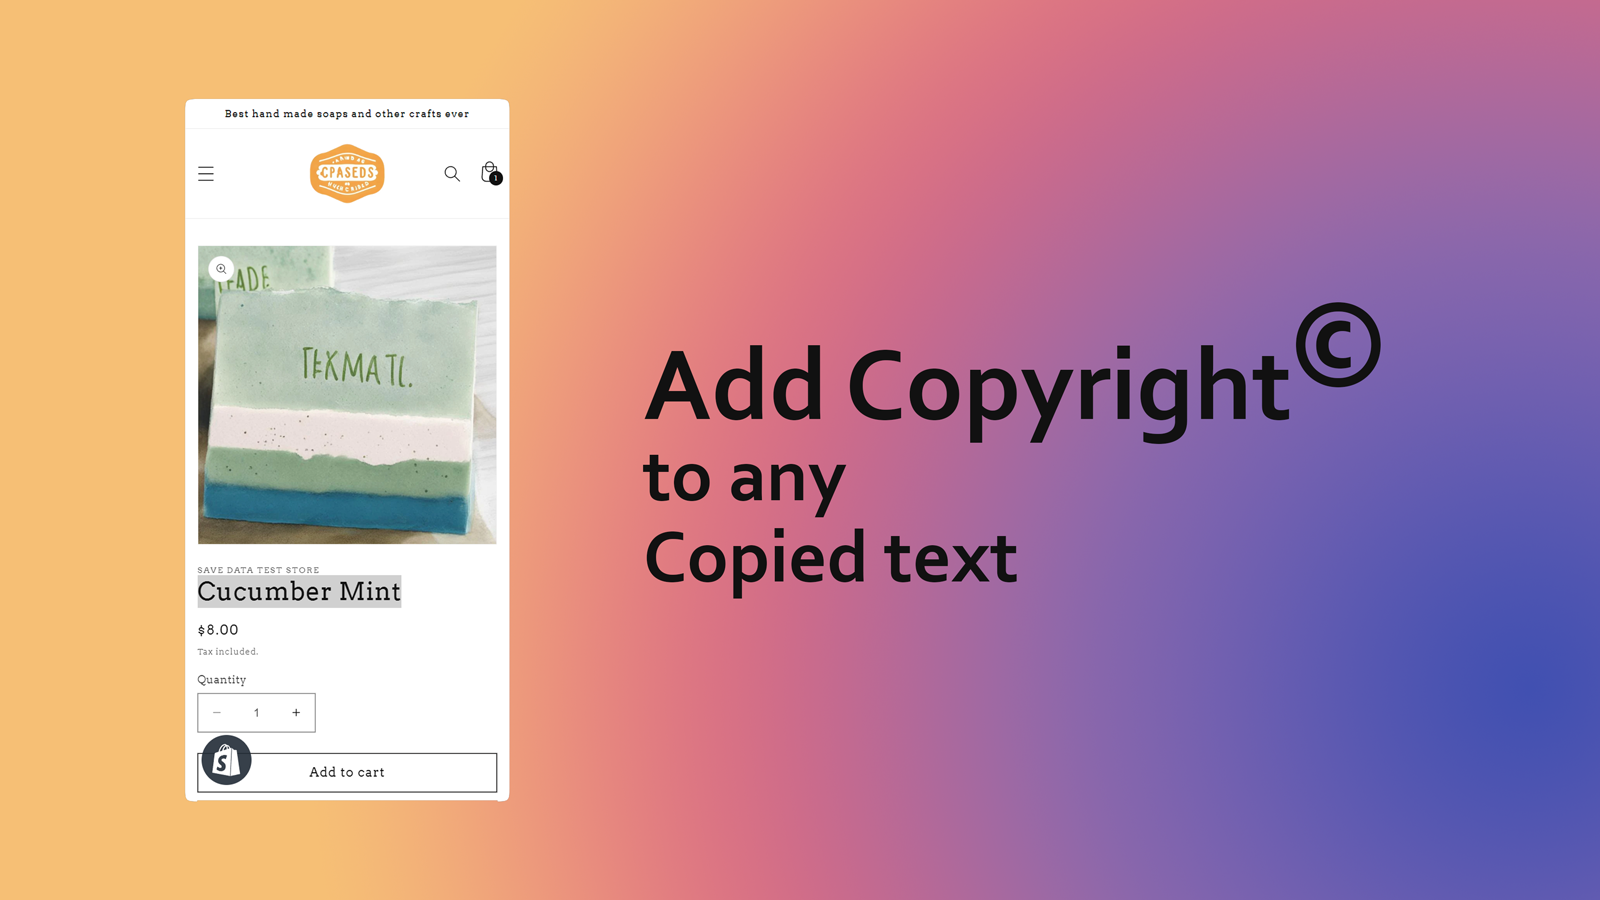 Add copyright to any copied text